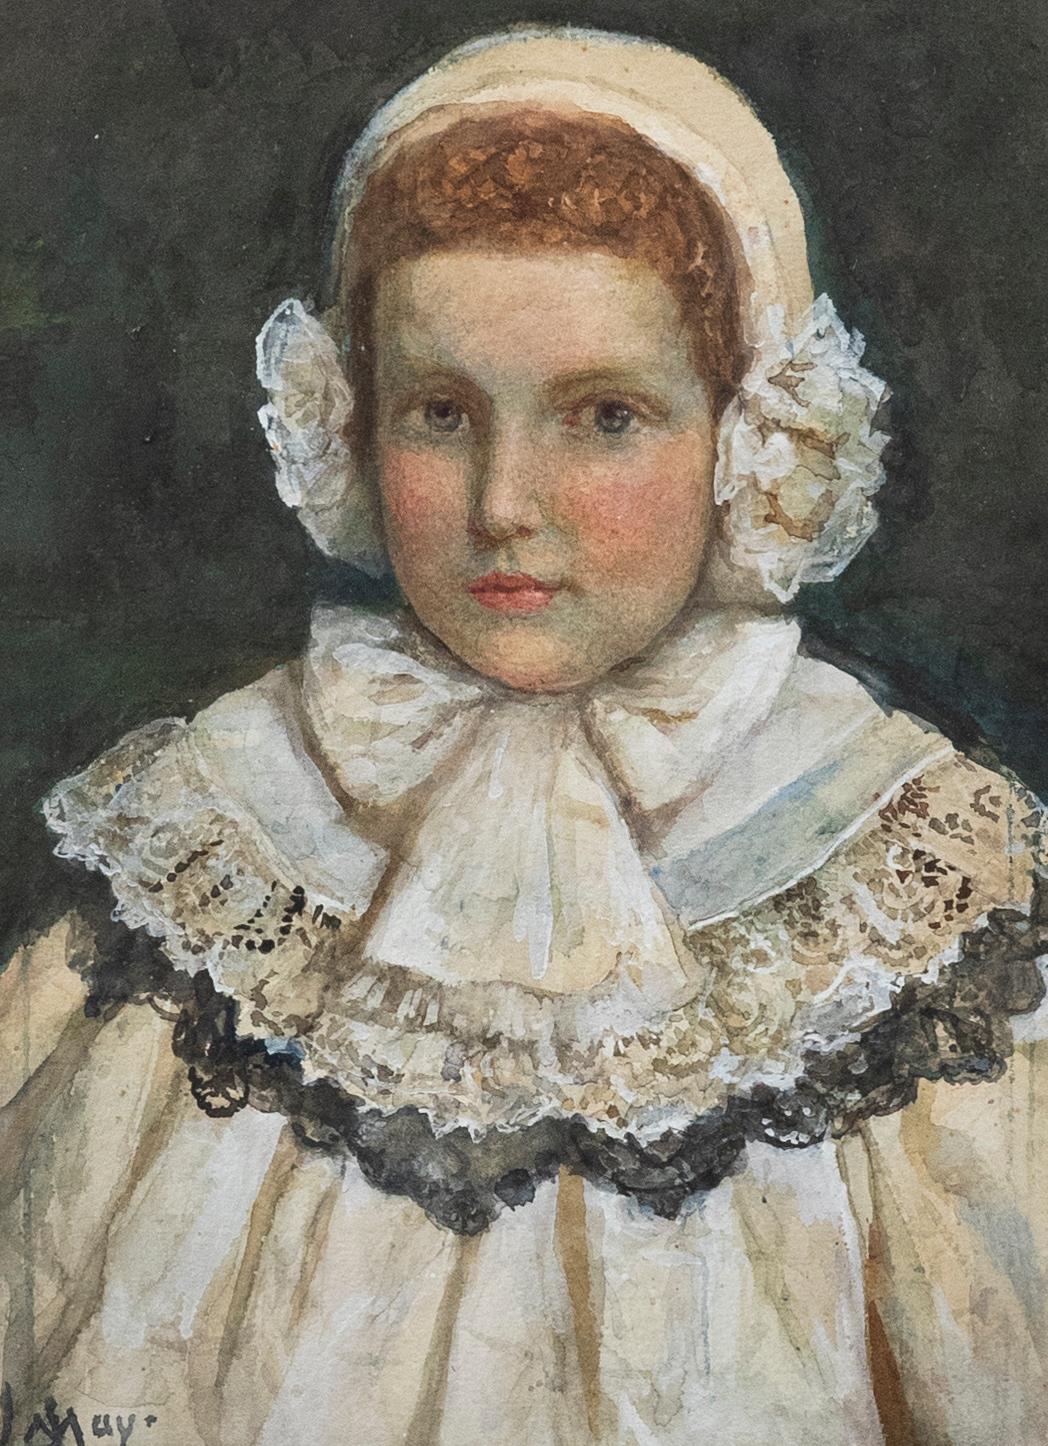 A fine Victorian portrait of a young child wearing a white bonnet with lace collar and gown. The artist has captured the sitter's complexion with great skill, perfectly depicting the young girl's rosy lips and pink cheeks. Even more exciting is the